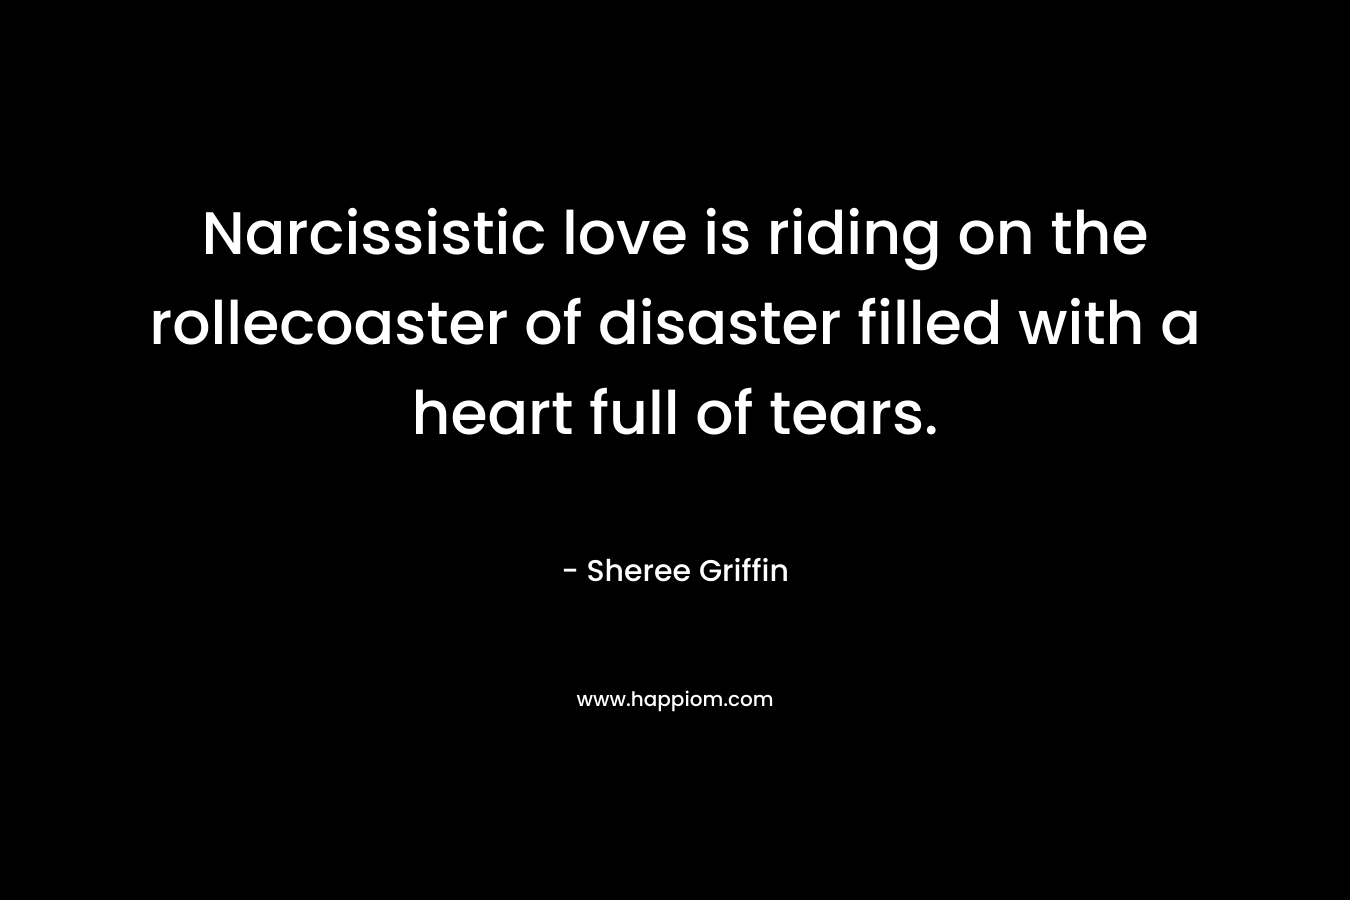 Narcissistic love is riding on the rollecoaster of disaster filled with a heart full of tears. – Sheree Griffin